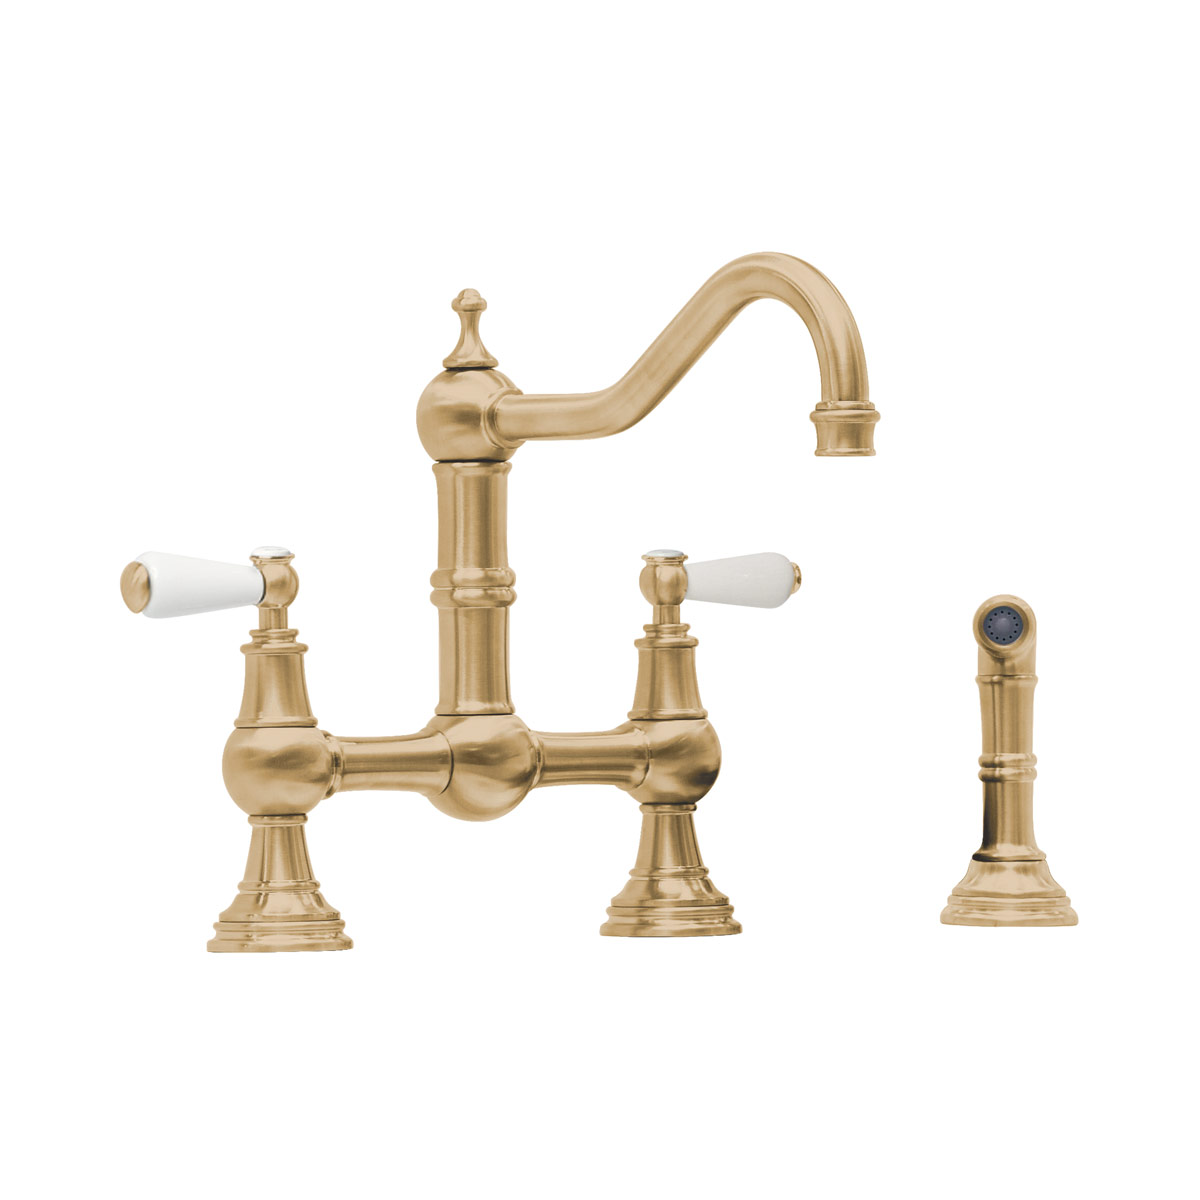 Shaws by Perrin & Rowe Hambleton French bridge mixer with spray rinse in Satin Brass. Provence style kitchen tap AUSH.4756. Distributed in Australia by Luxe by Design, Brisbane.